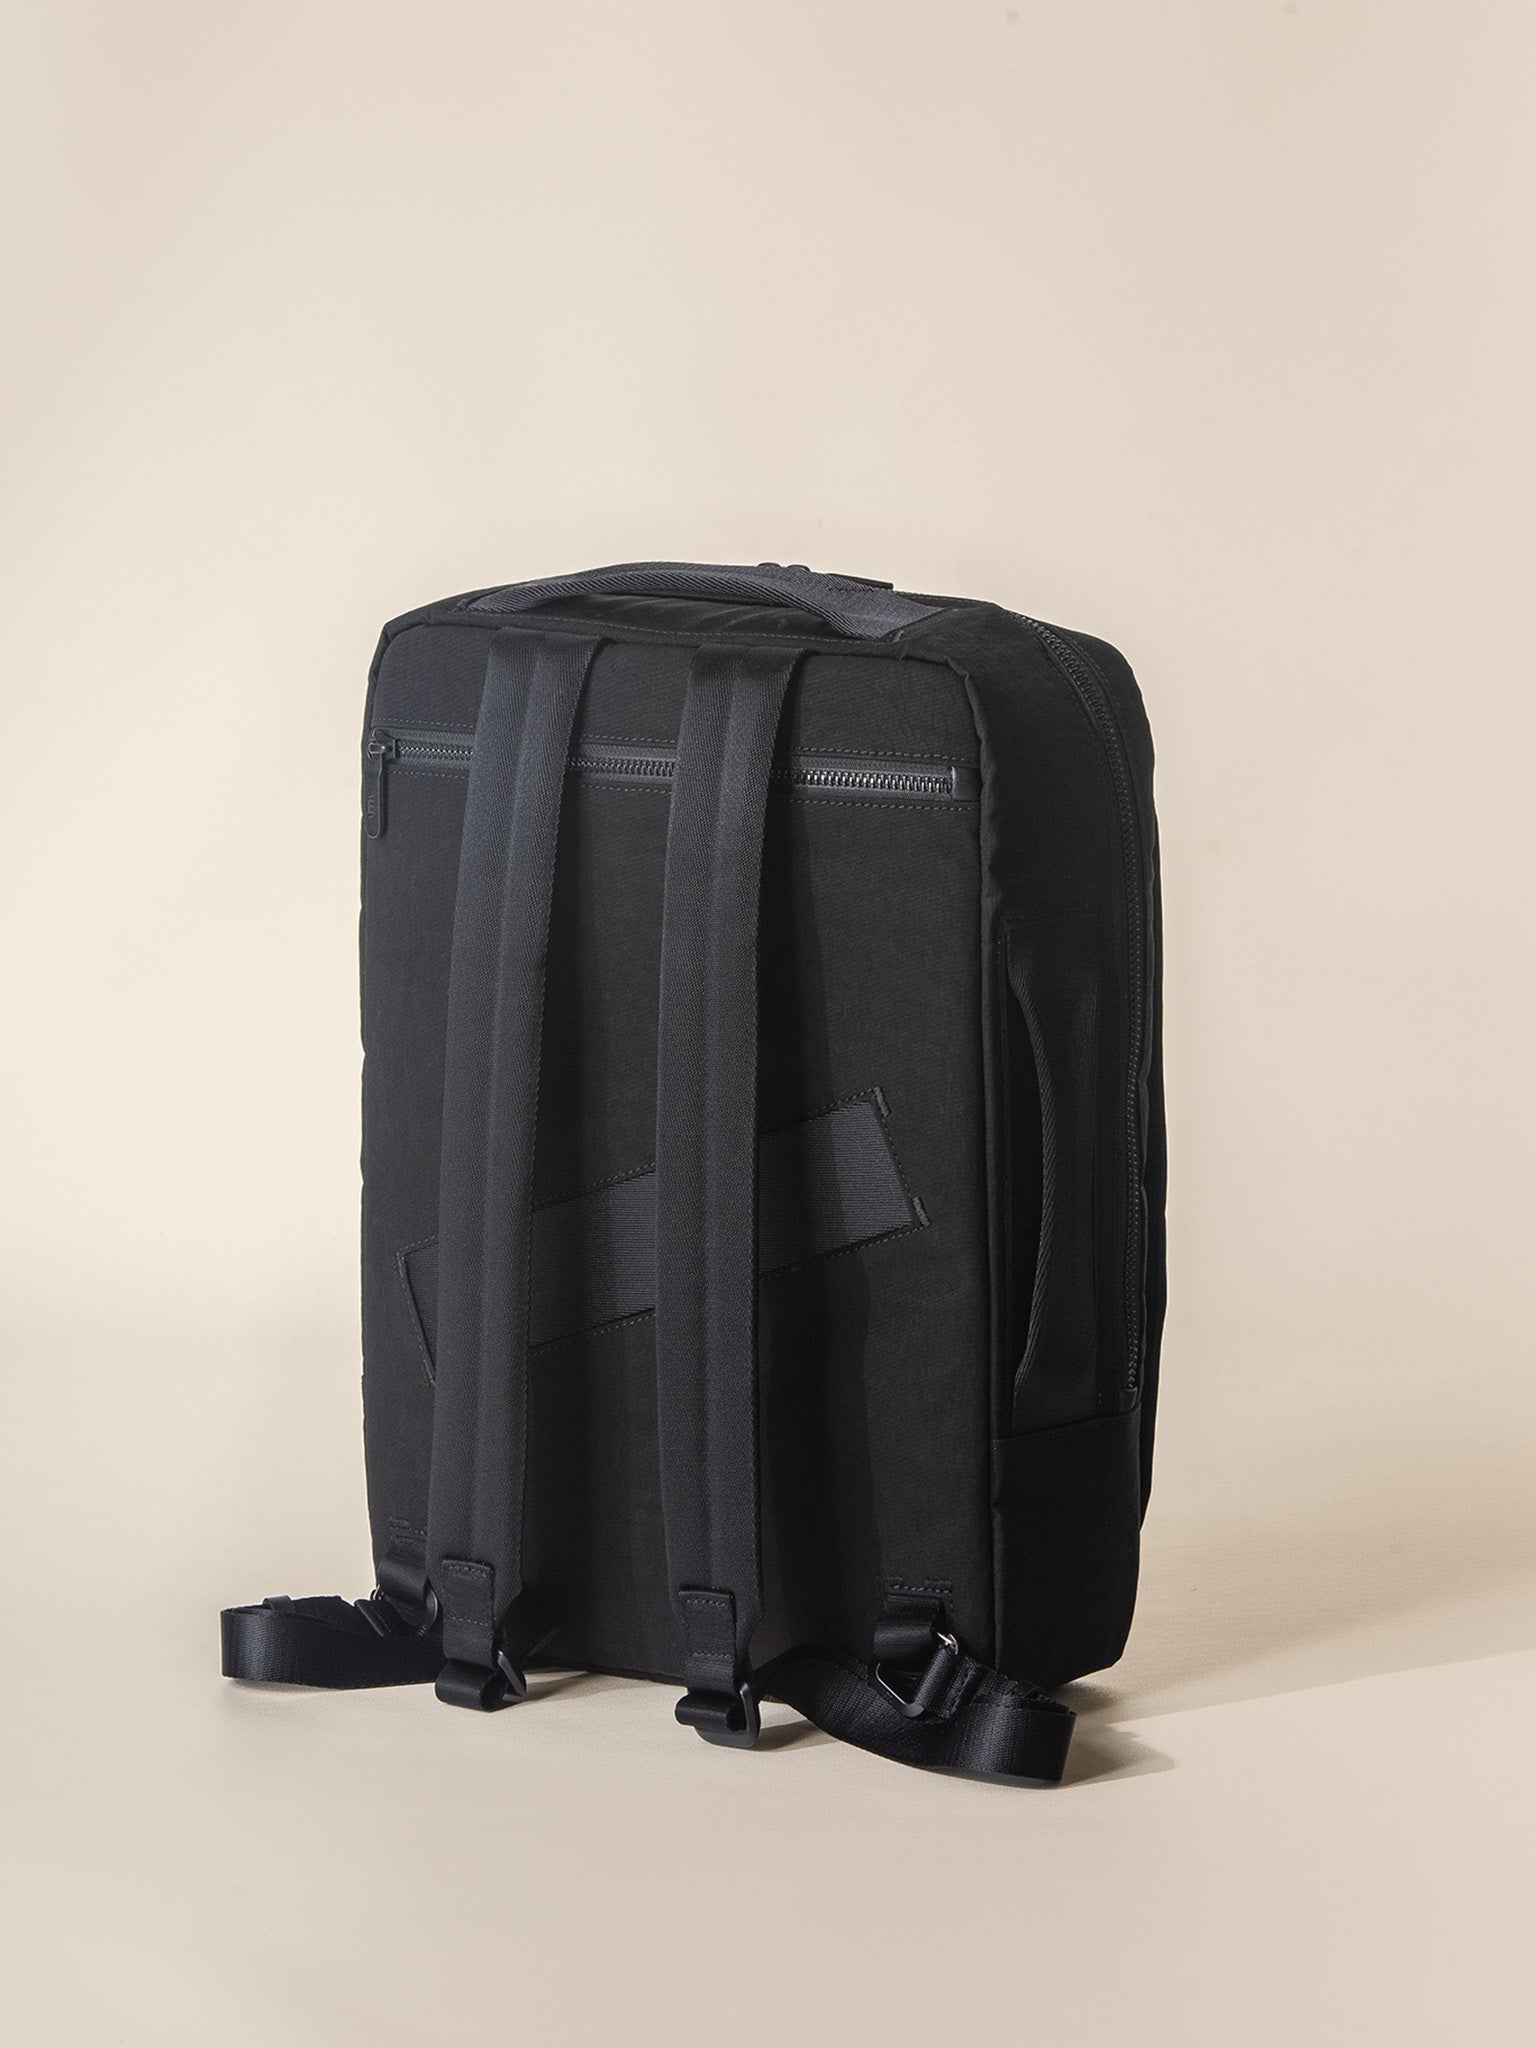 A professional-looking black business backpack with multiple compartments and a top handle for easy carrying.